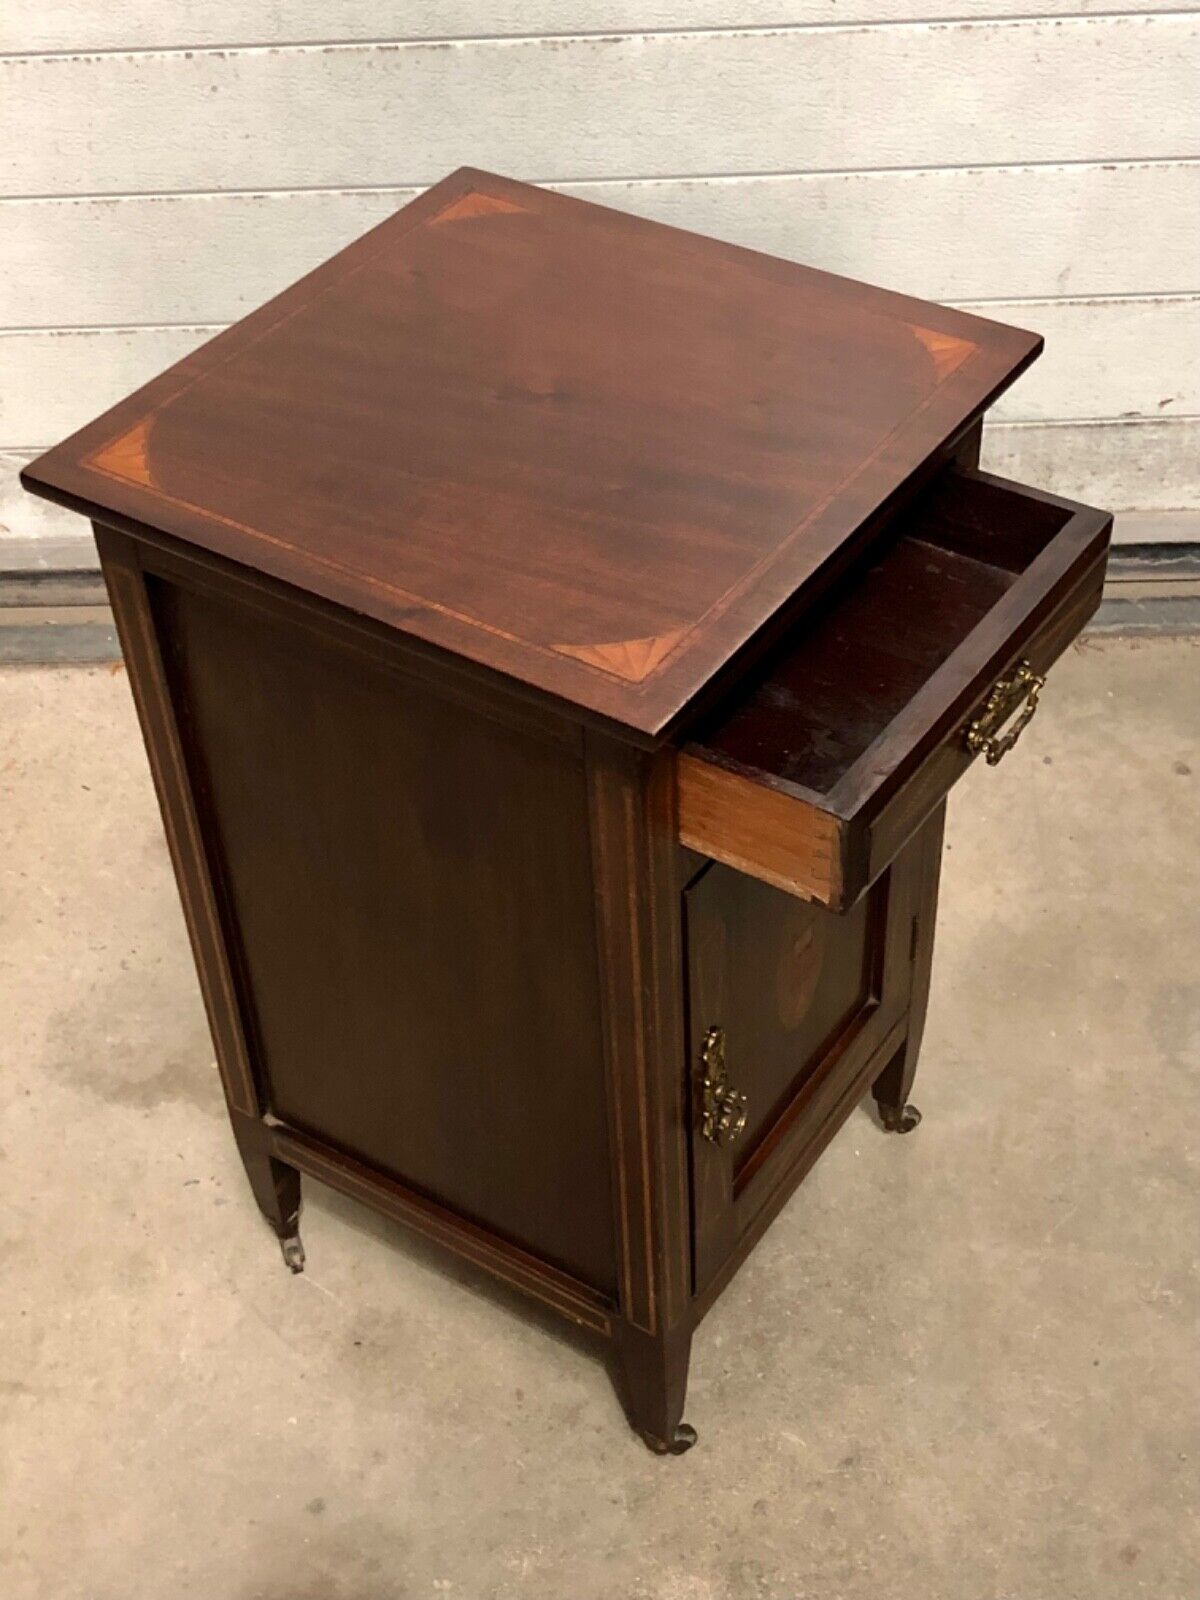 000747....Handsome Edwardian Inlaid Mahogany Bedside Table ( sold )